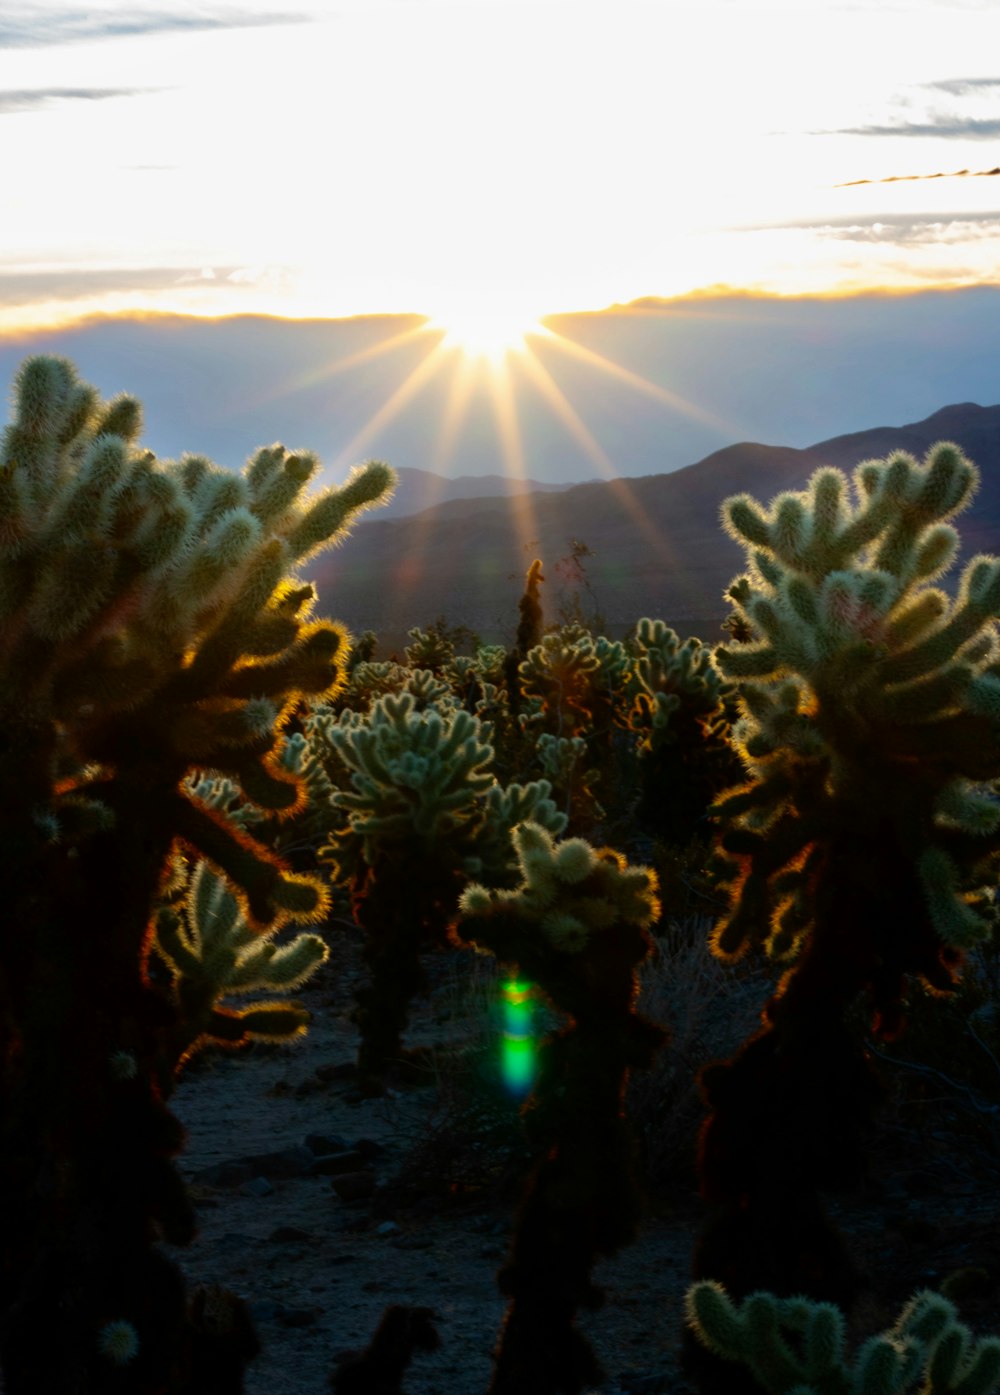 the sun is setting over a cactus field